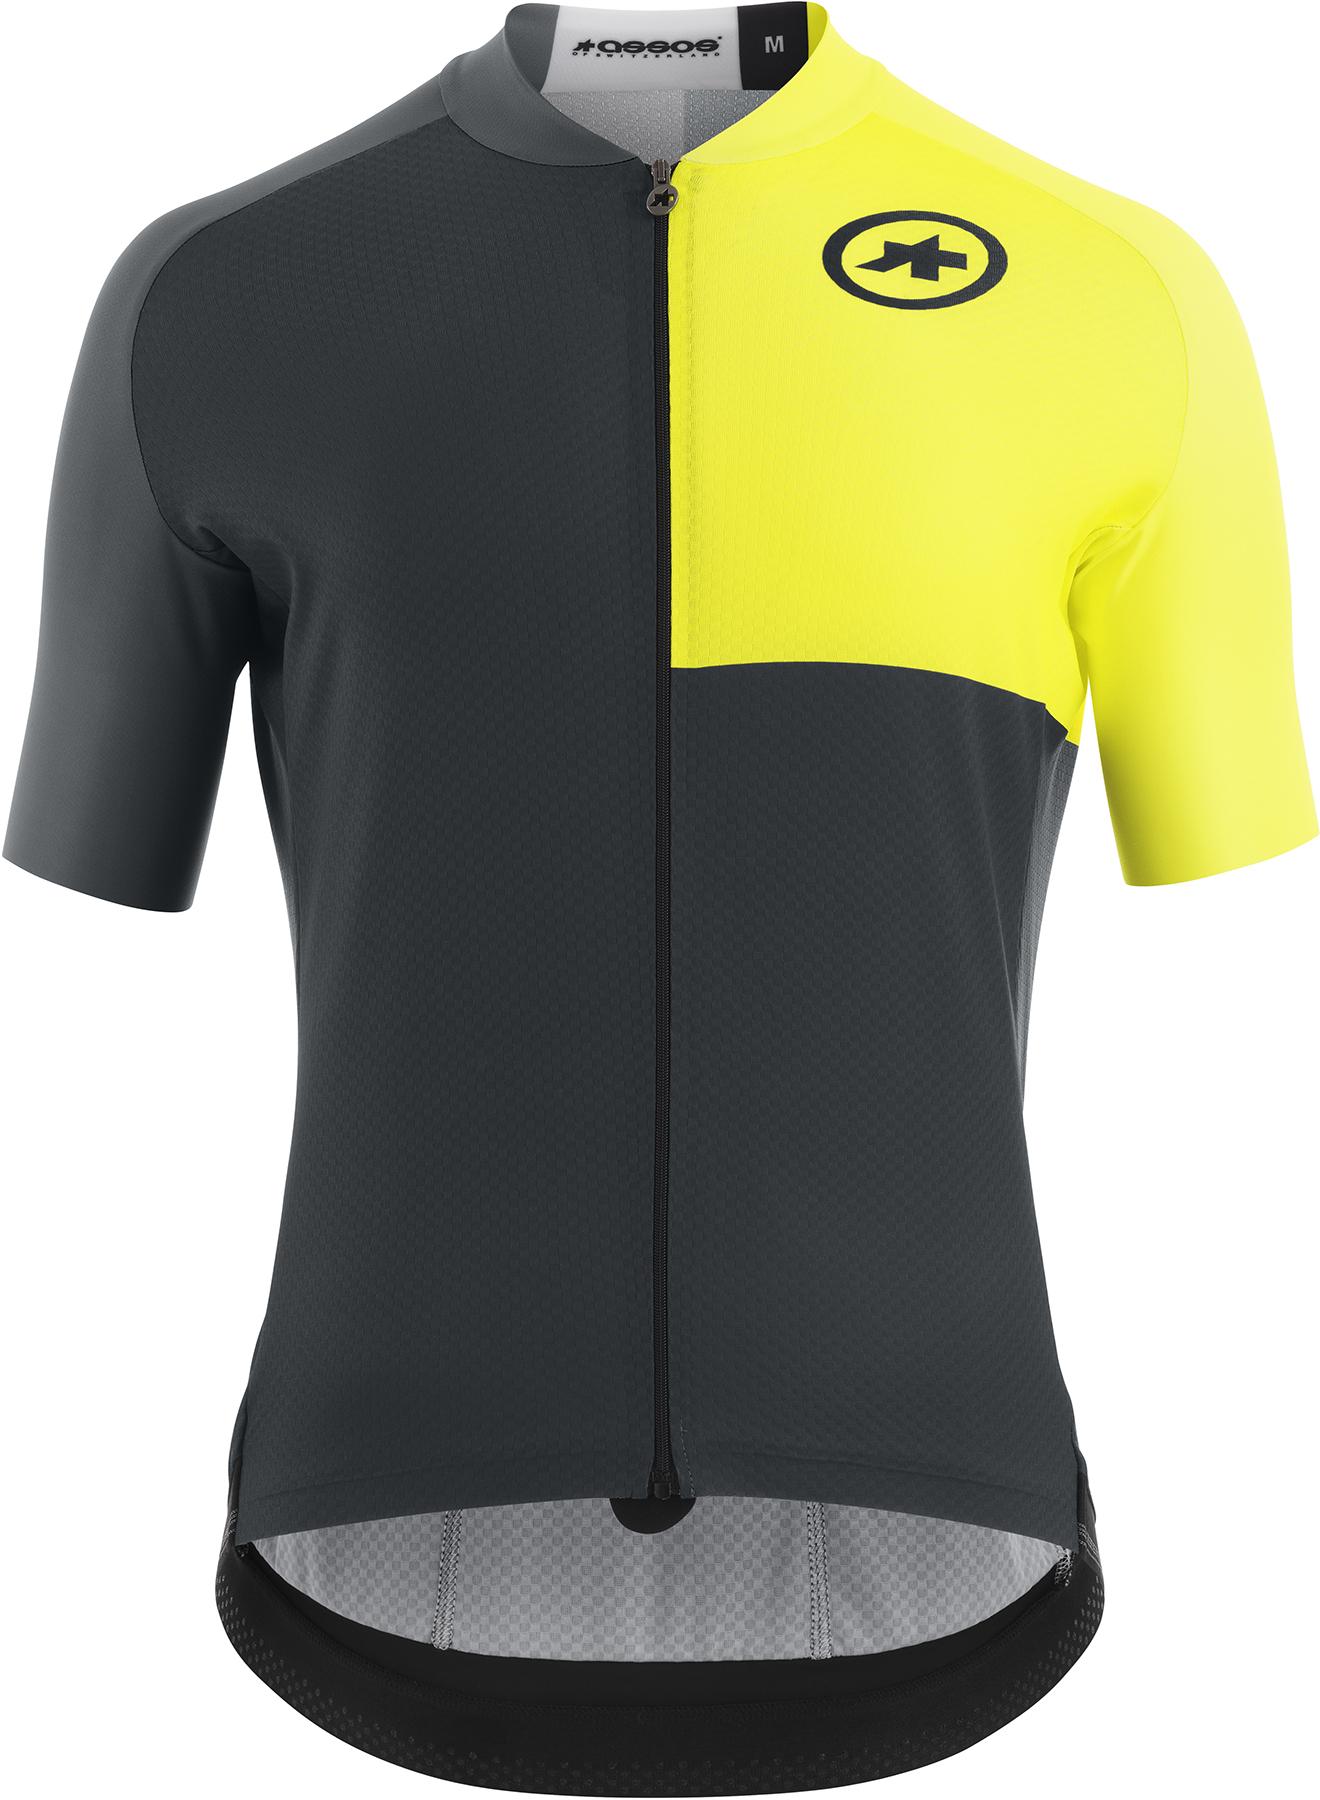 Assos Mille Gt Jersey C2 Evo Stahlstern - Optic Yellow